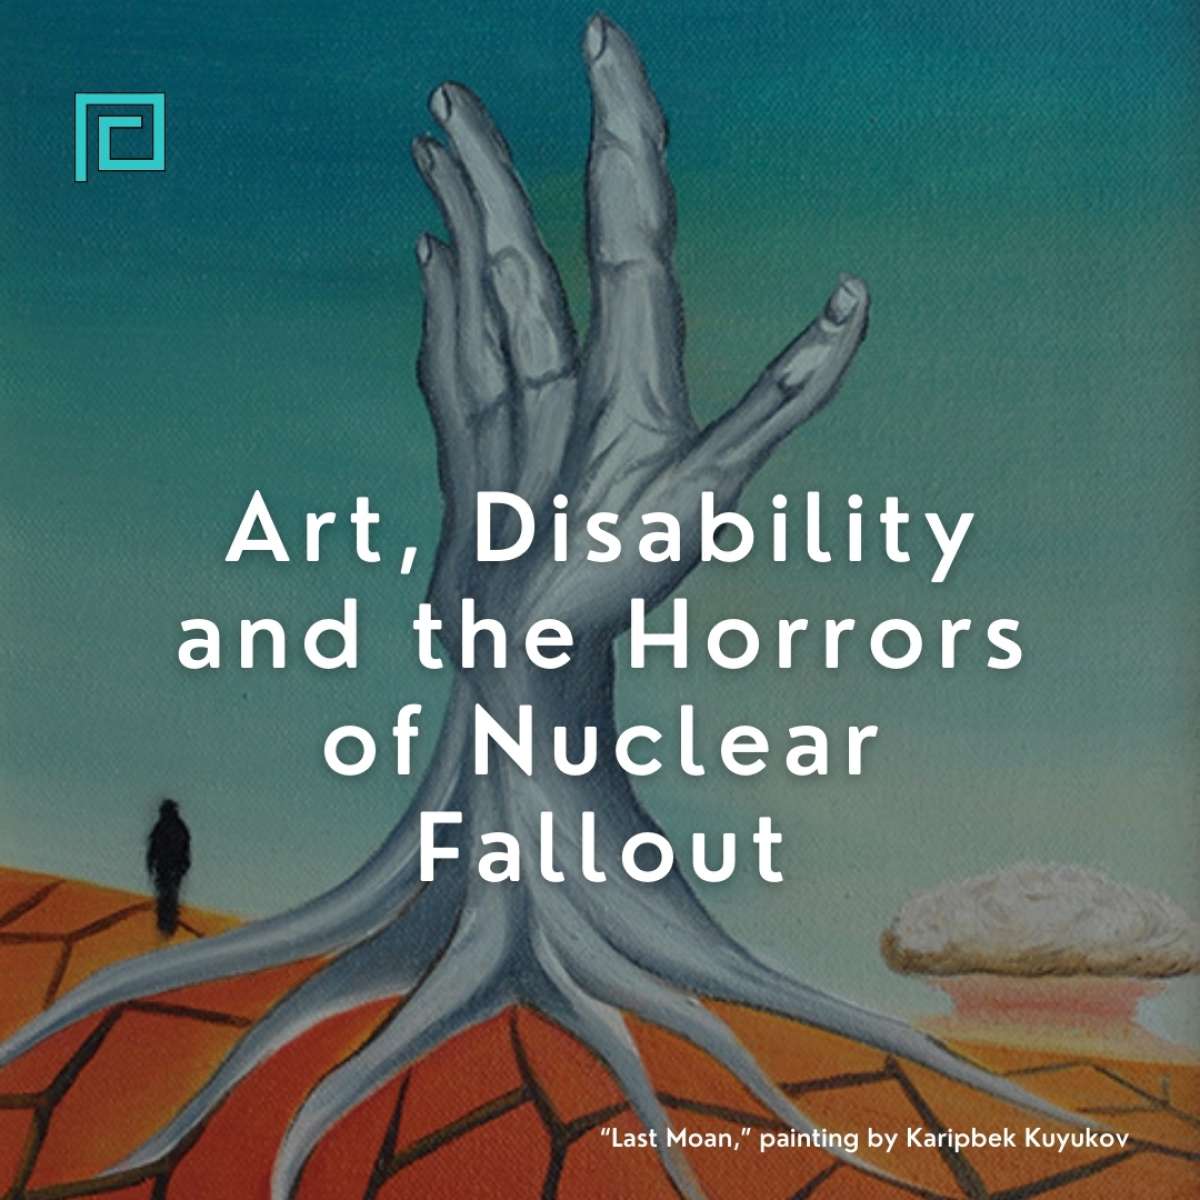 Art, Disability and the Horrors of Nuclear Fallout